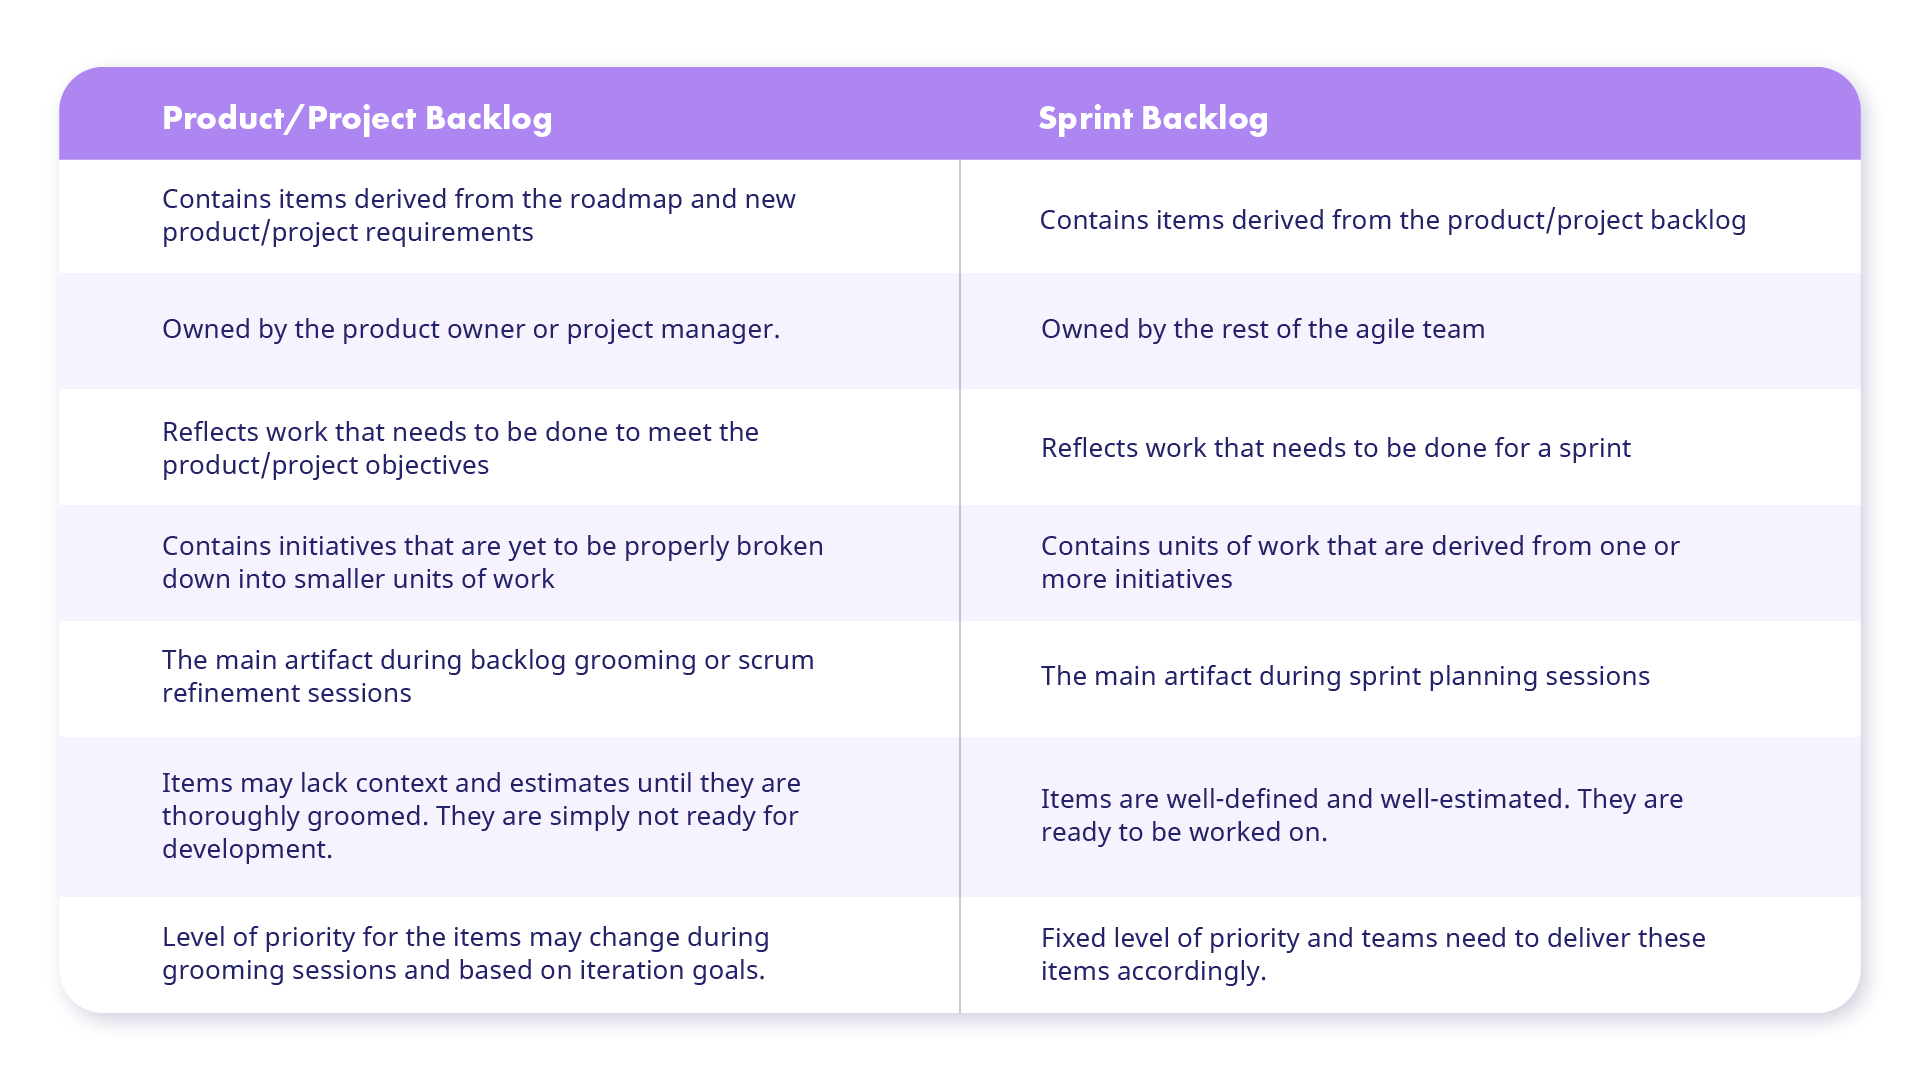 Differences between product backlog and sprint backlog.